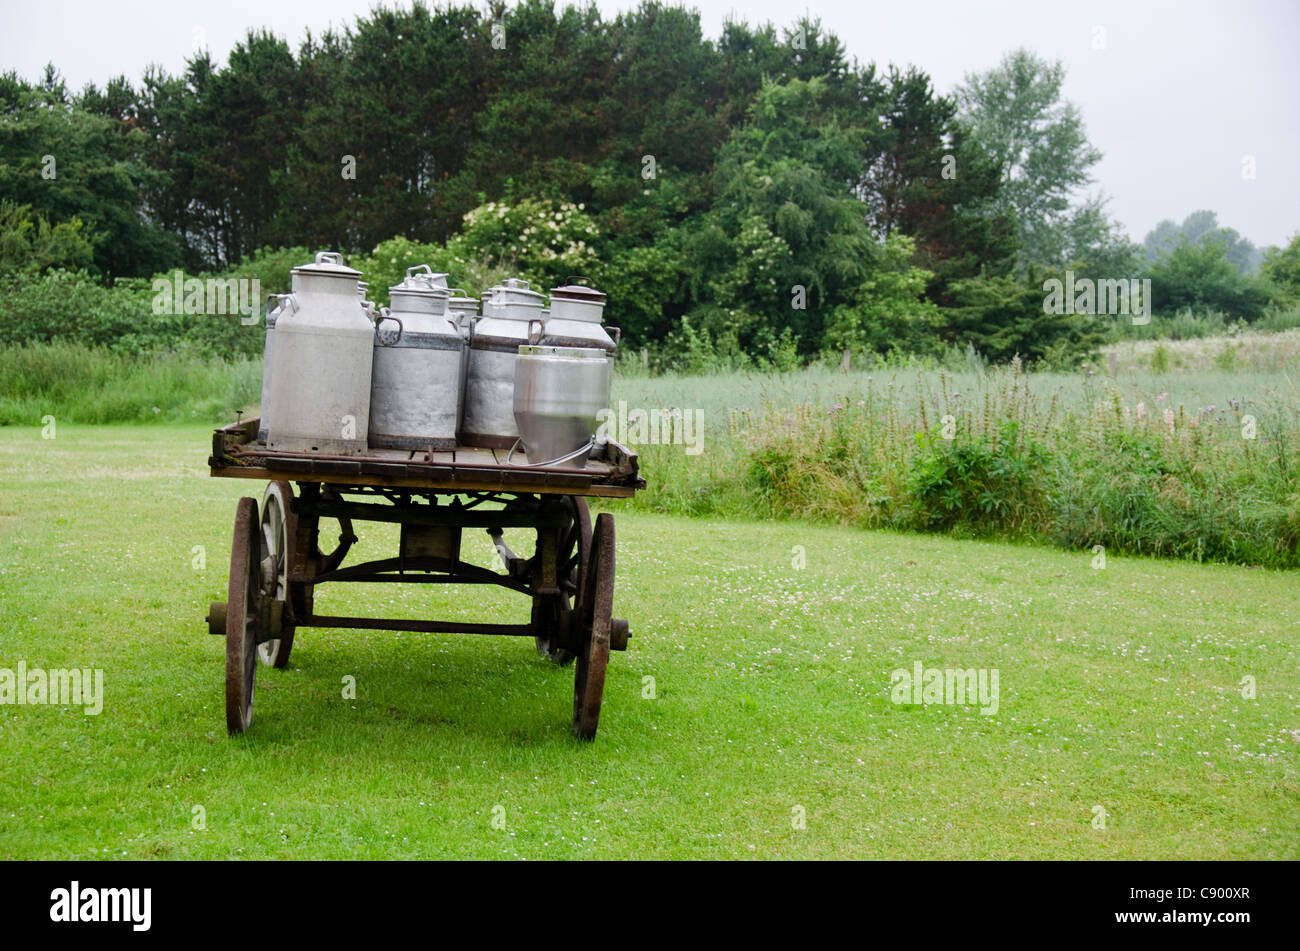 old traditional milk cans on a wooden horse and cart Stock Photo